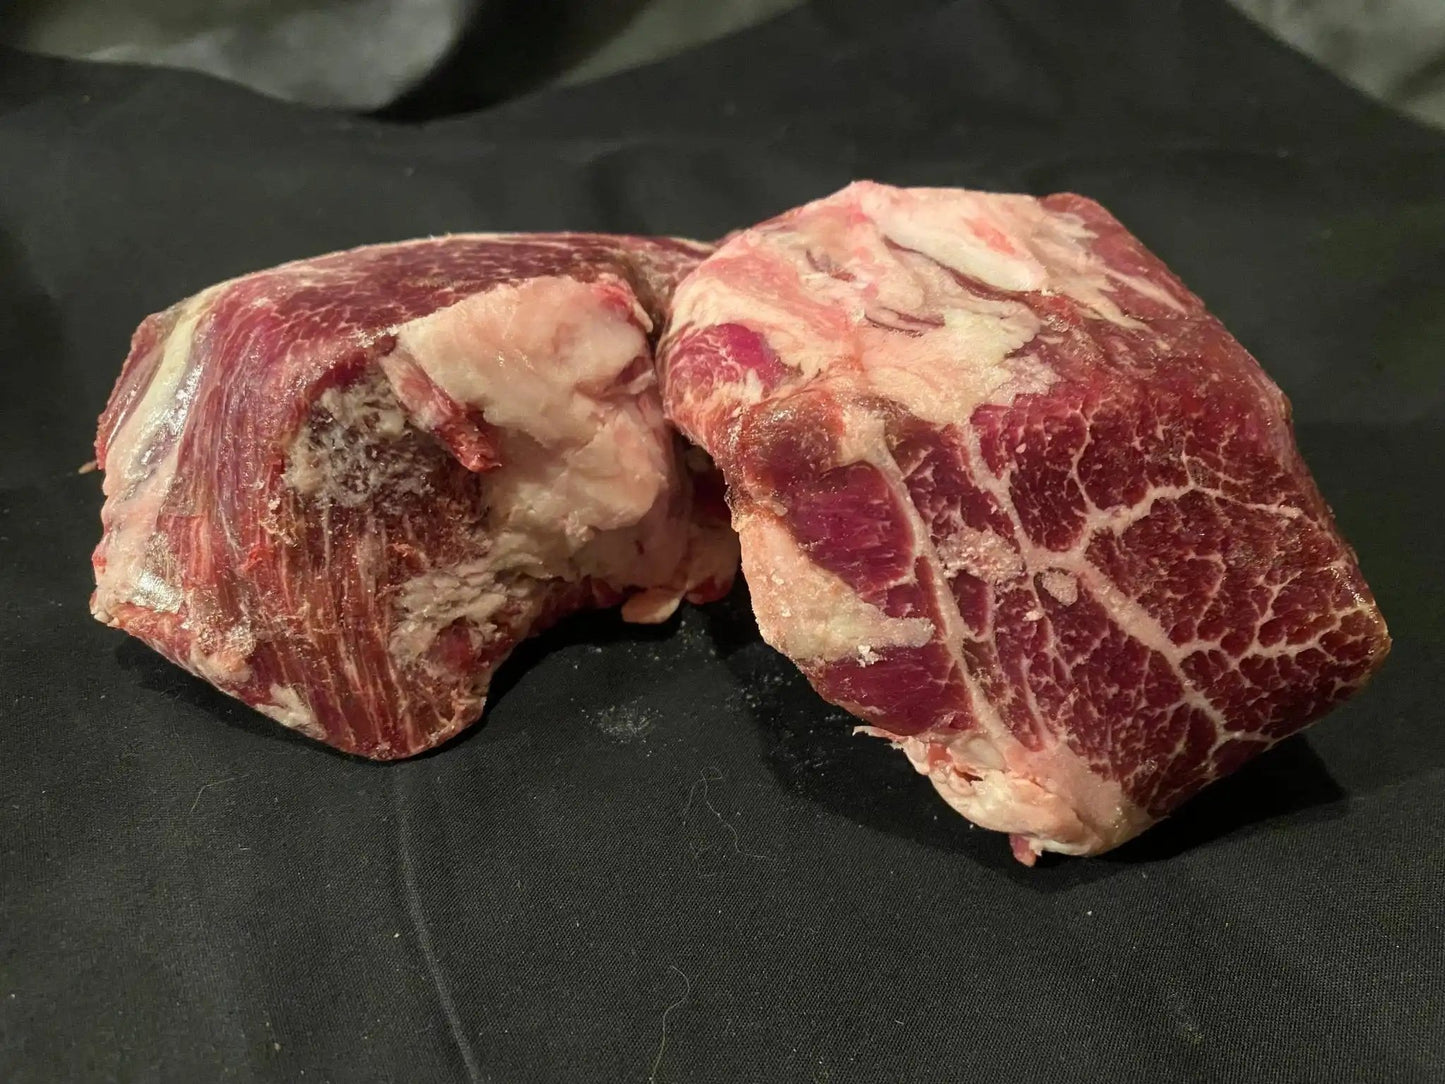 100% All-Natural Grass-Fed Pasture-Raised Wagyu Tenderloin FiletIndulge in the ultimate luxury with Hufeisen Ranch's 100% All-Natural Grass-Fed Pasture-Raised Wagyu Tenderloin Filet. This famous steak boasts unparalleled tenderne100%The Hufeisen-Ranch (WYO Wagyu)